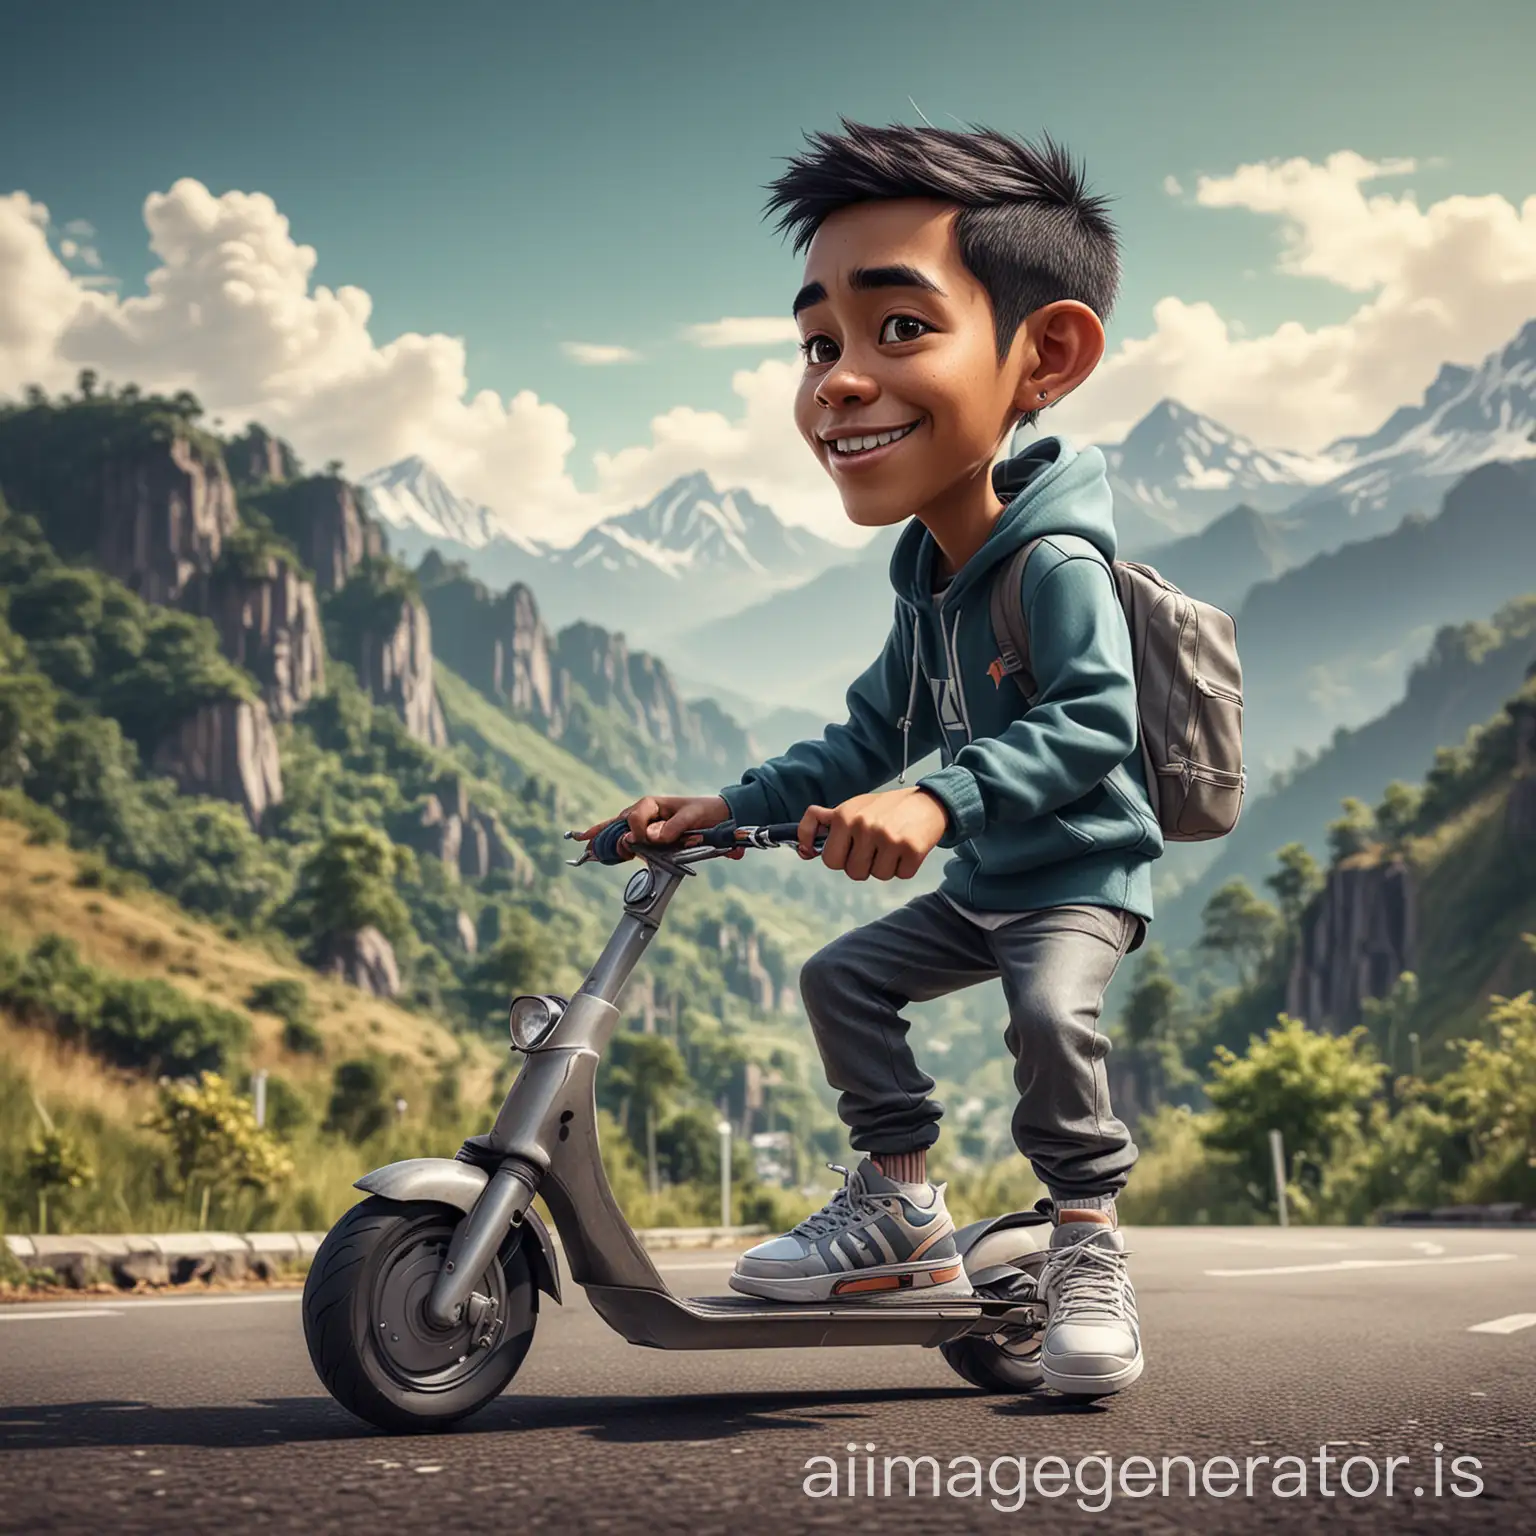 Indonesian-Man-Riding-Metic-Scooter-in-Mountainous-Landscape